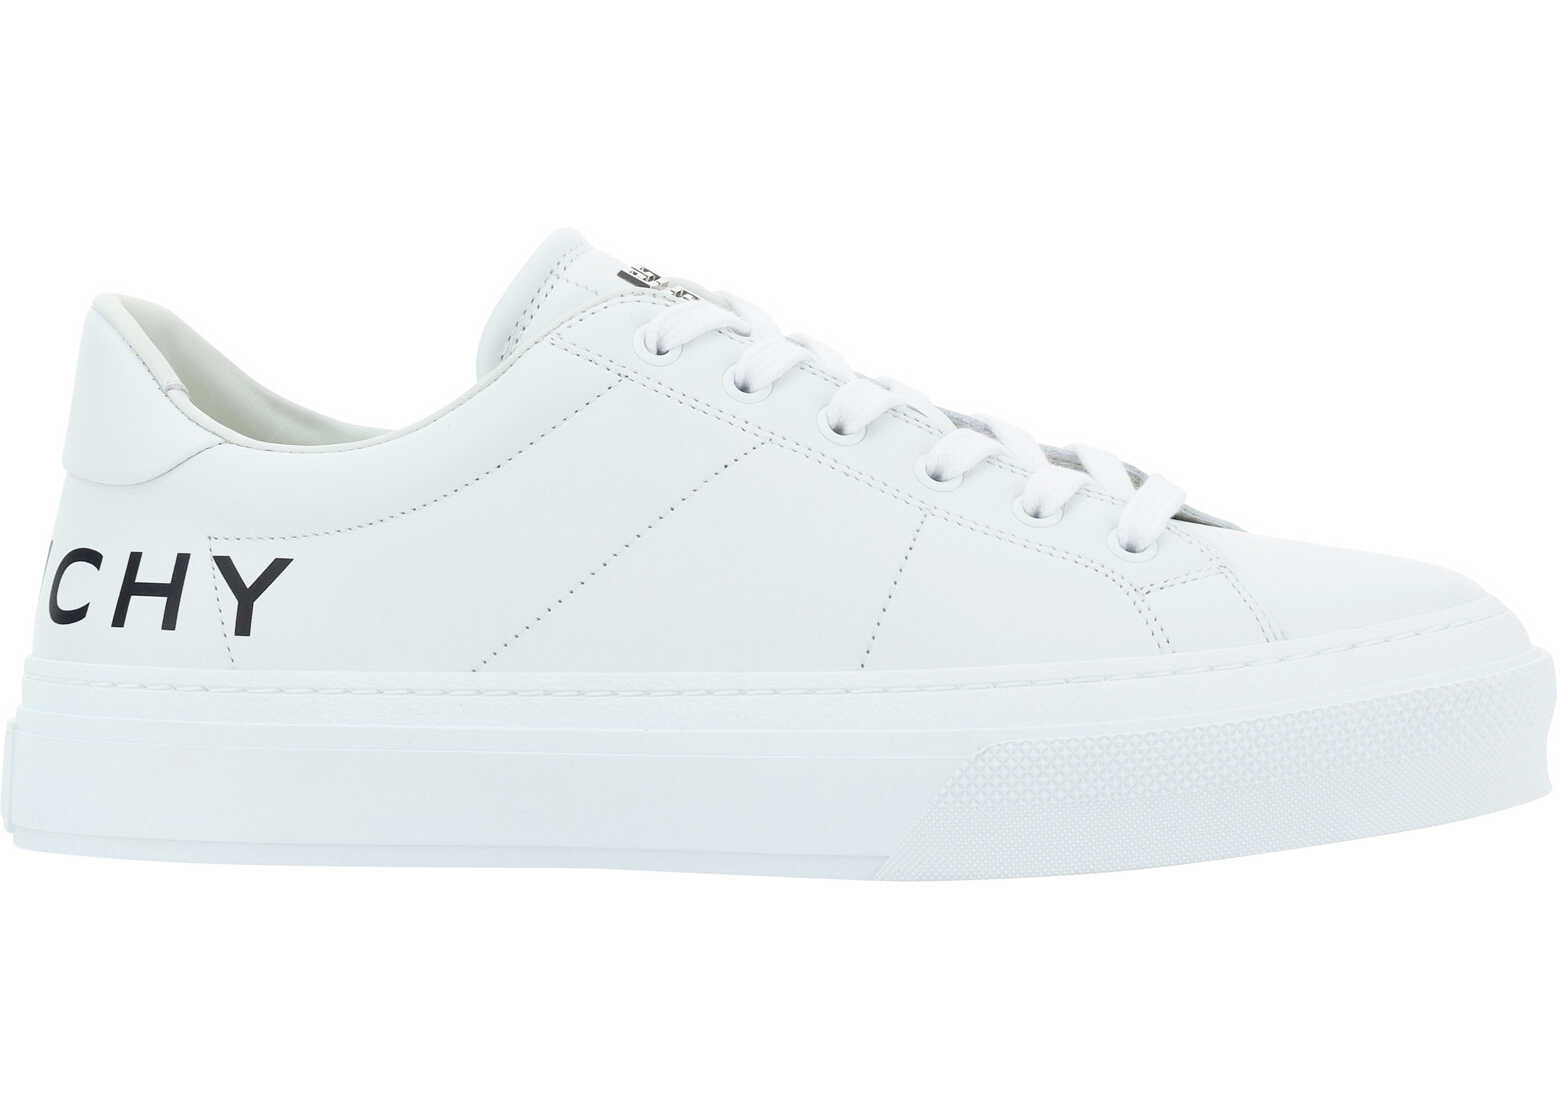 Givenchy Sneakers WHITE image7